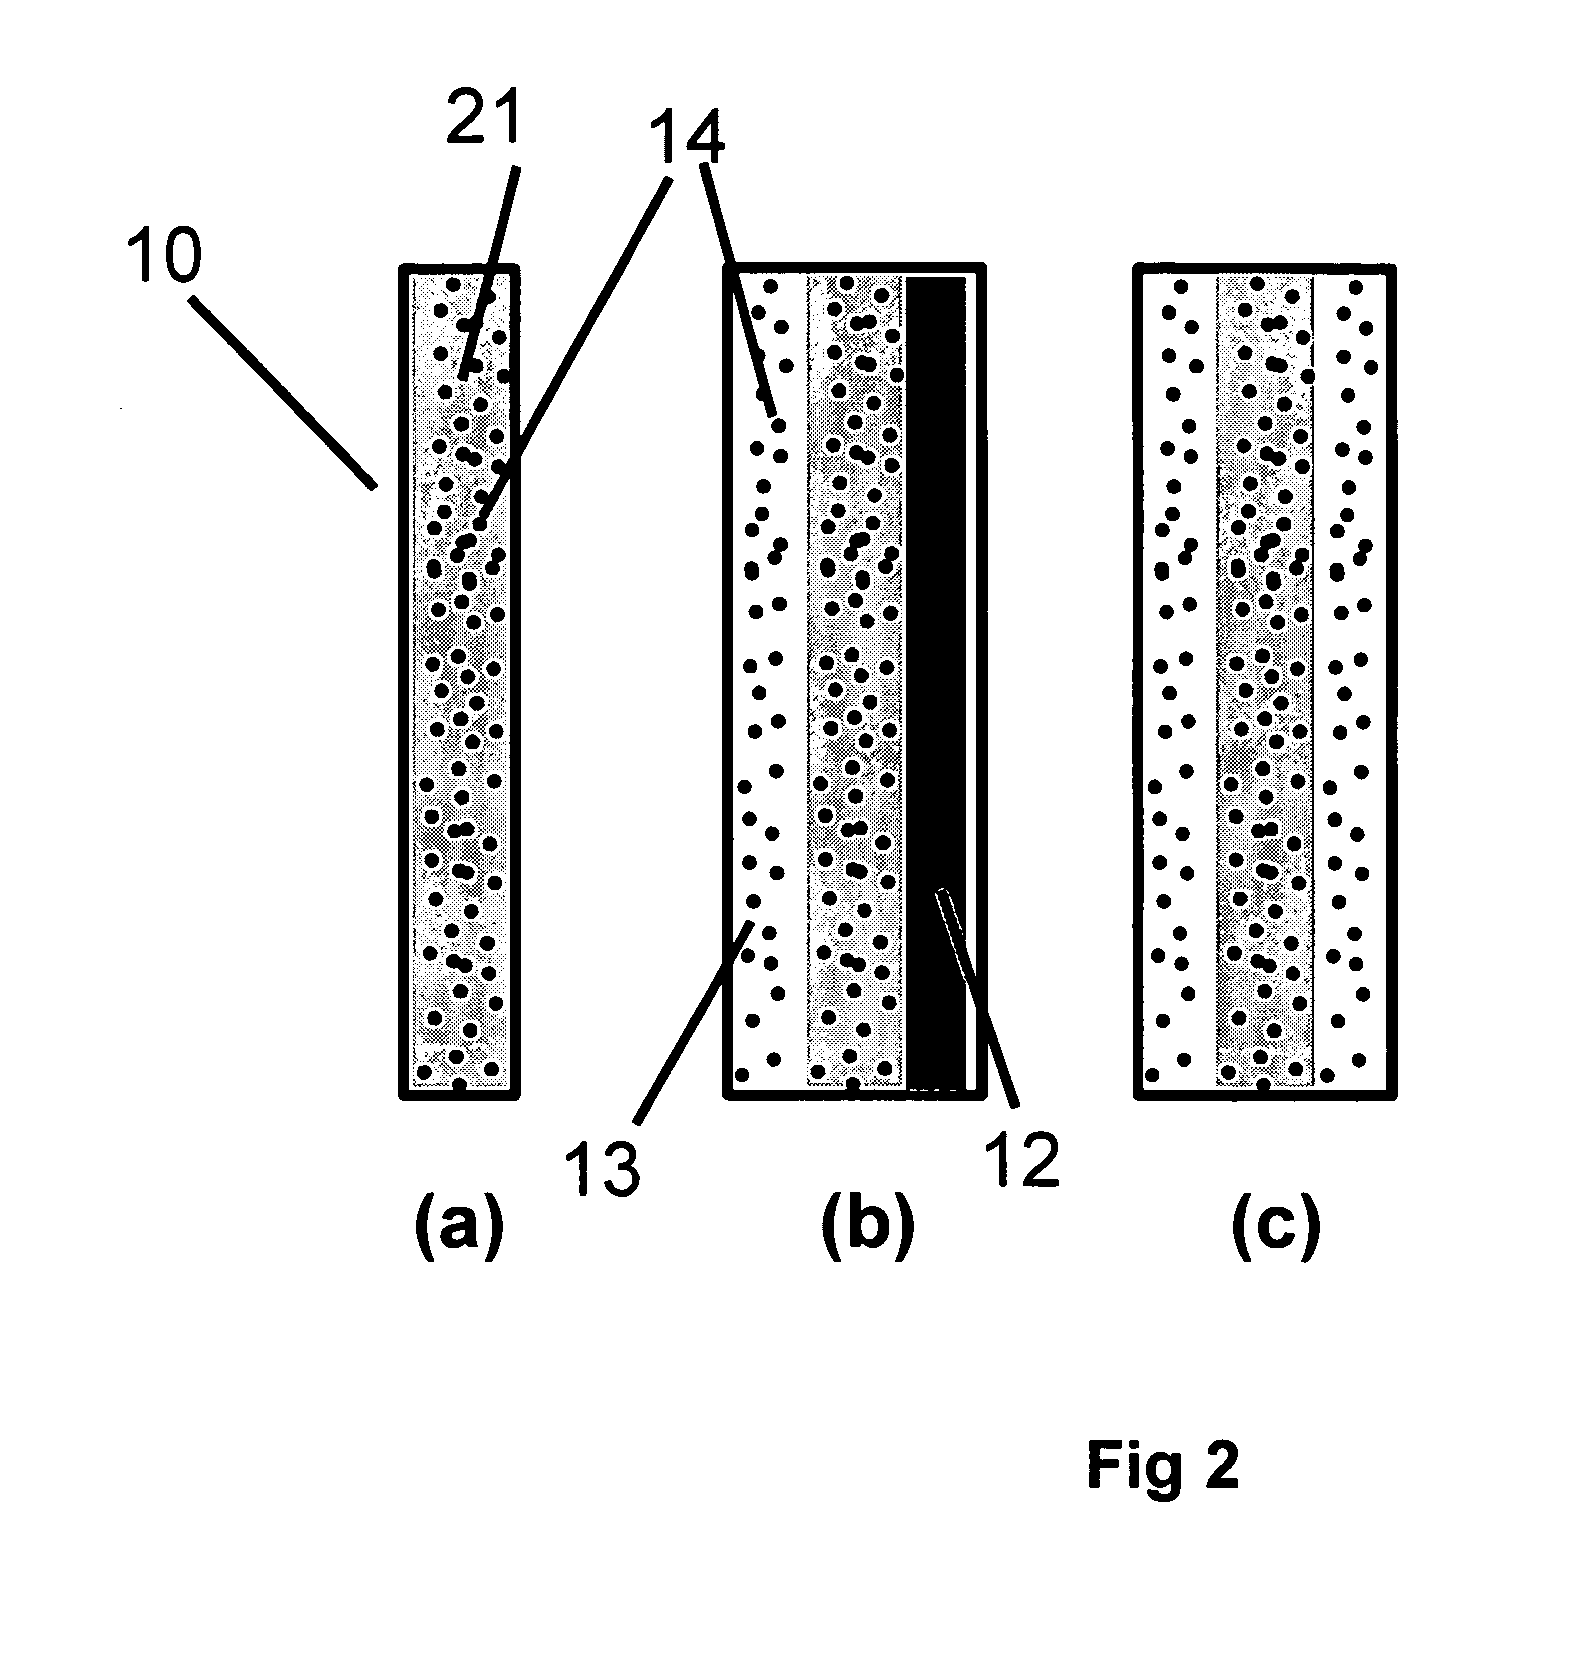 Solid polymer electrolyte and process for making same